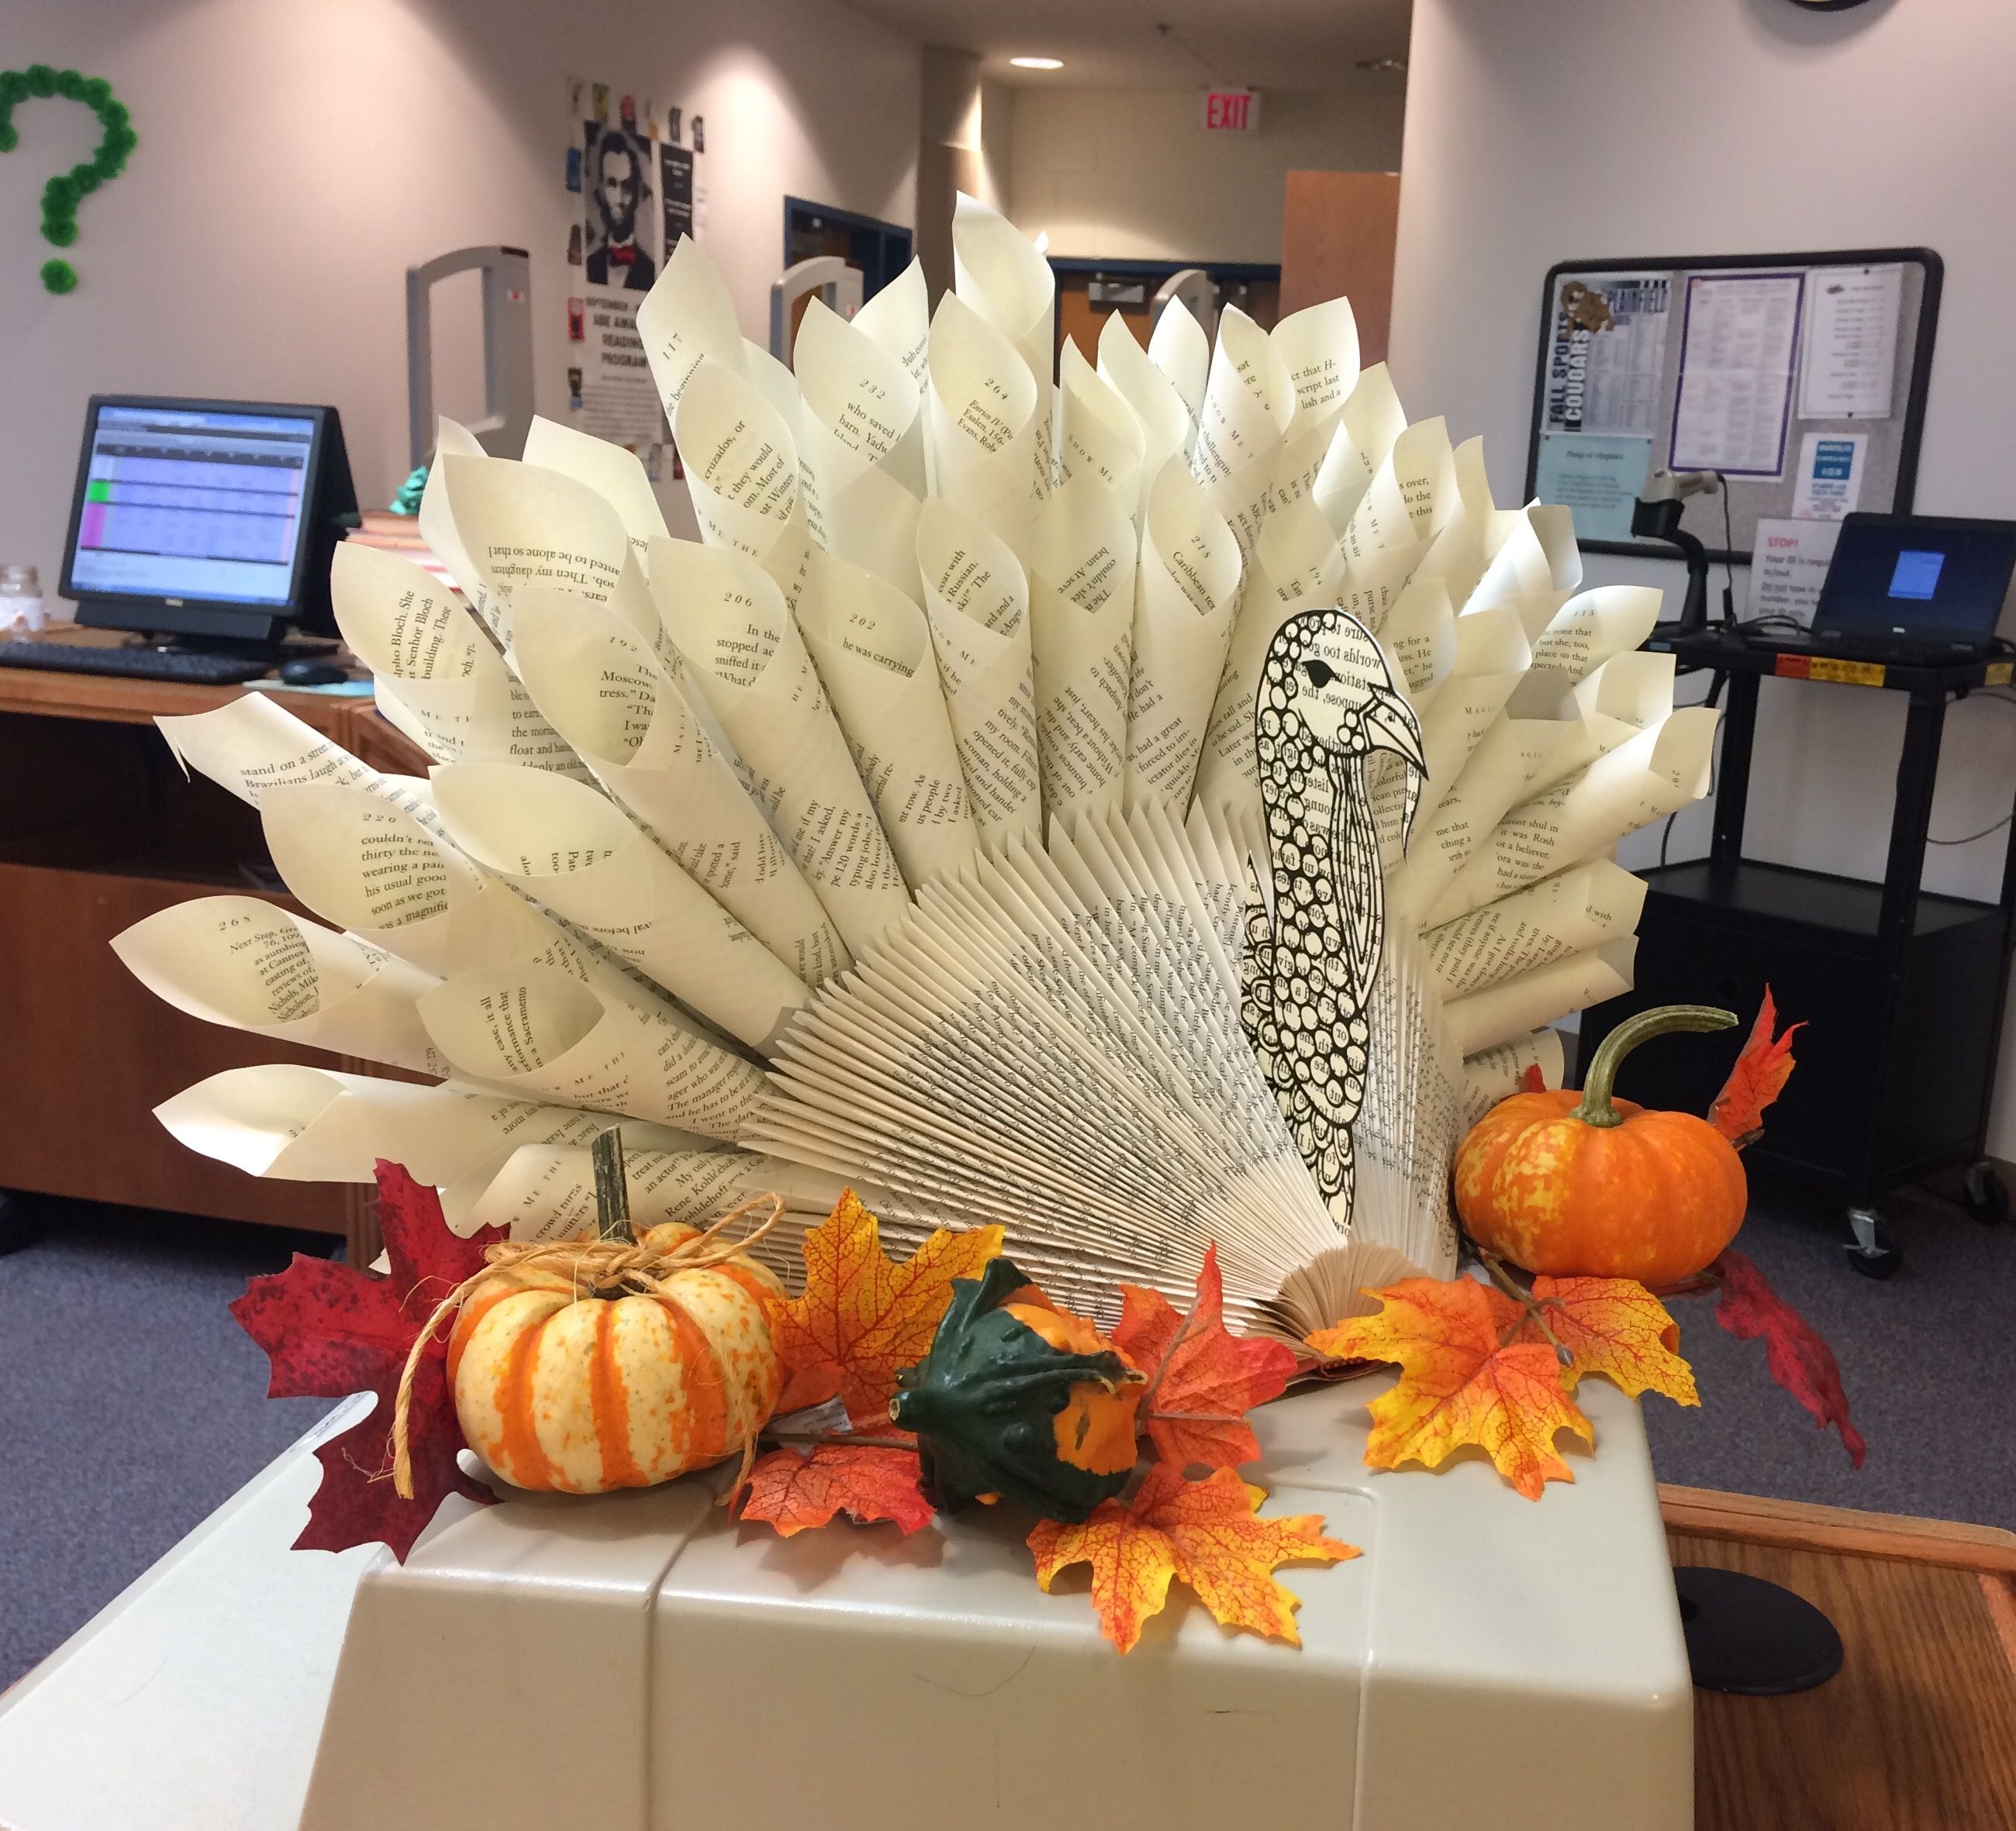 Turkey made from recycled book